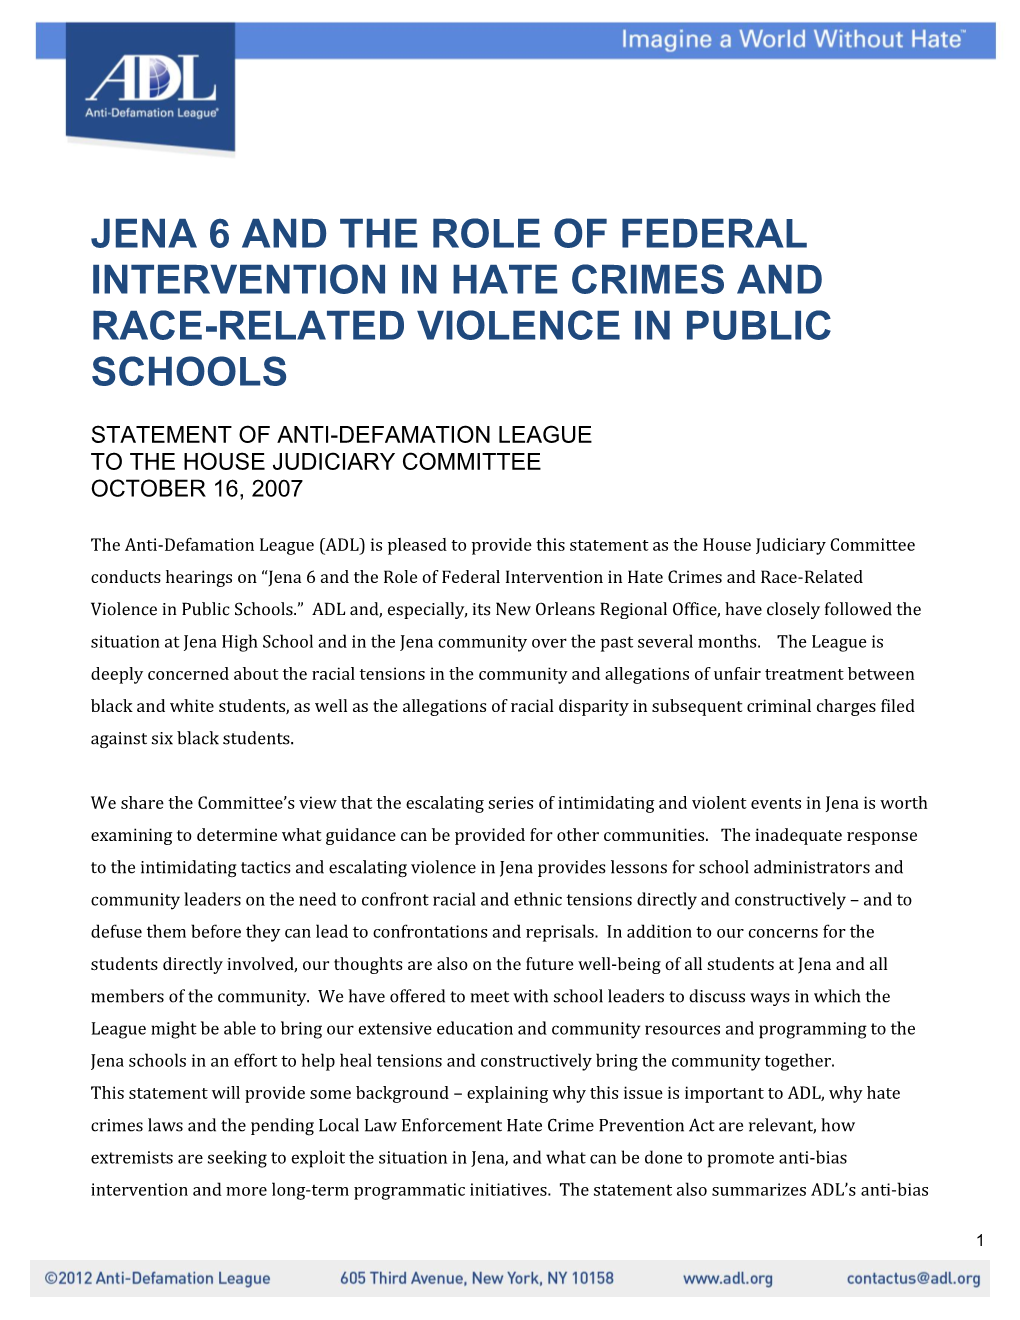 Jena 6 and the Role of Federal Intervention in Hate Crimes and Race-Related Violence in Public Schools